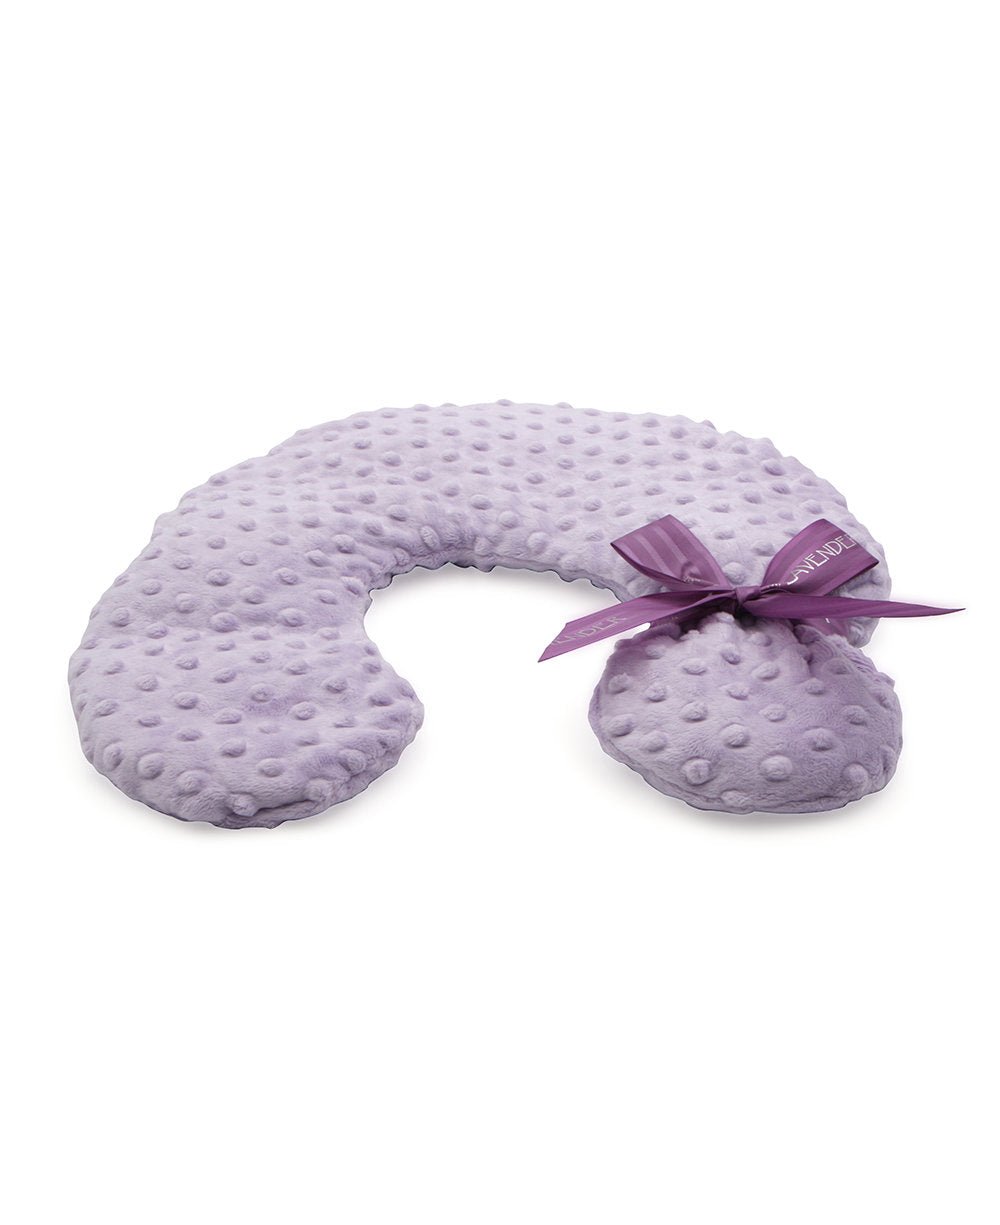 Relaxing Lavender Weighted Neck Pillow - Wellness